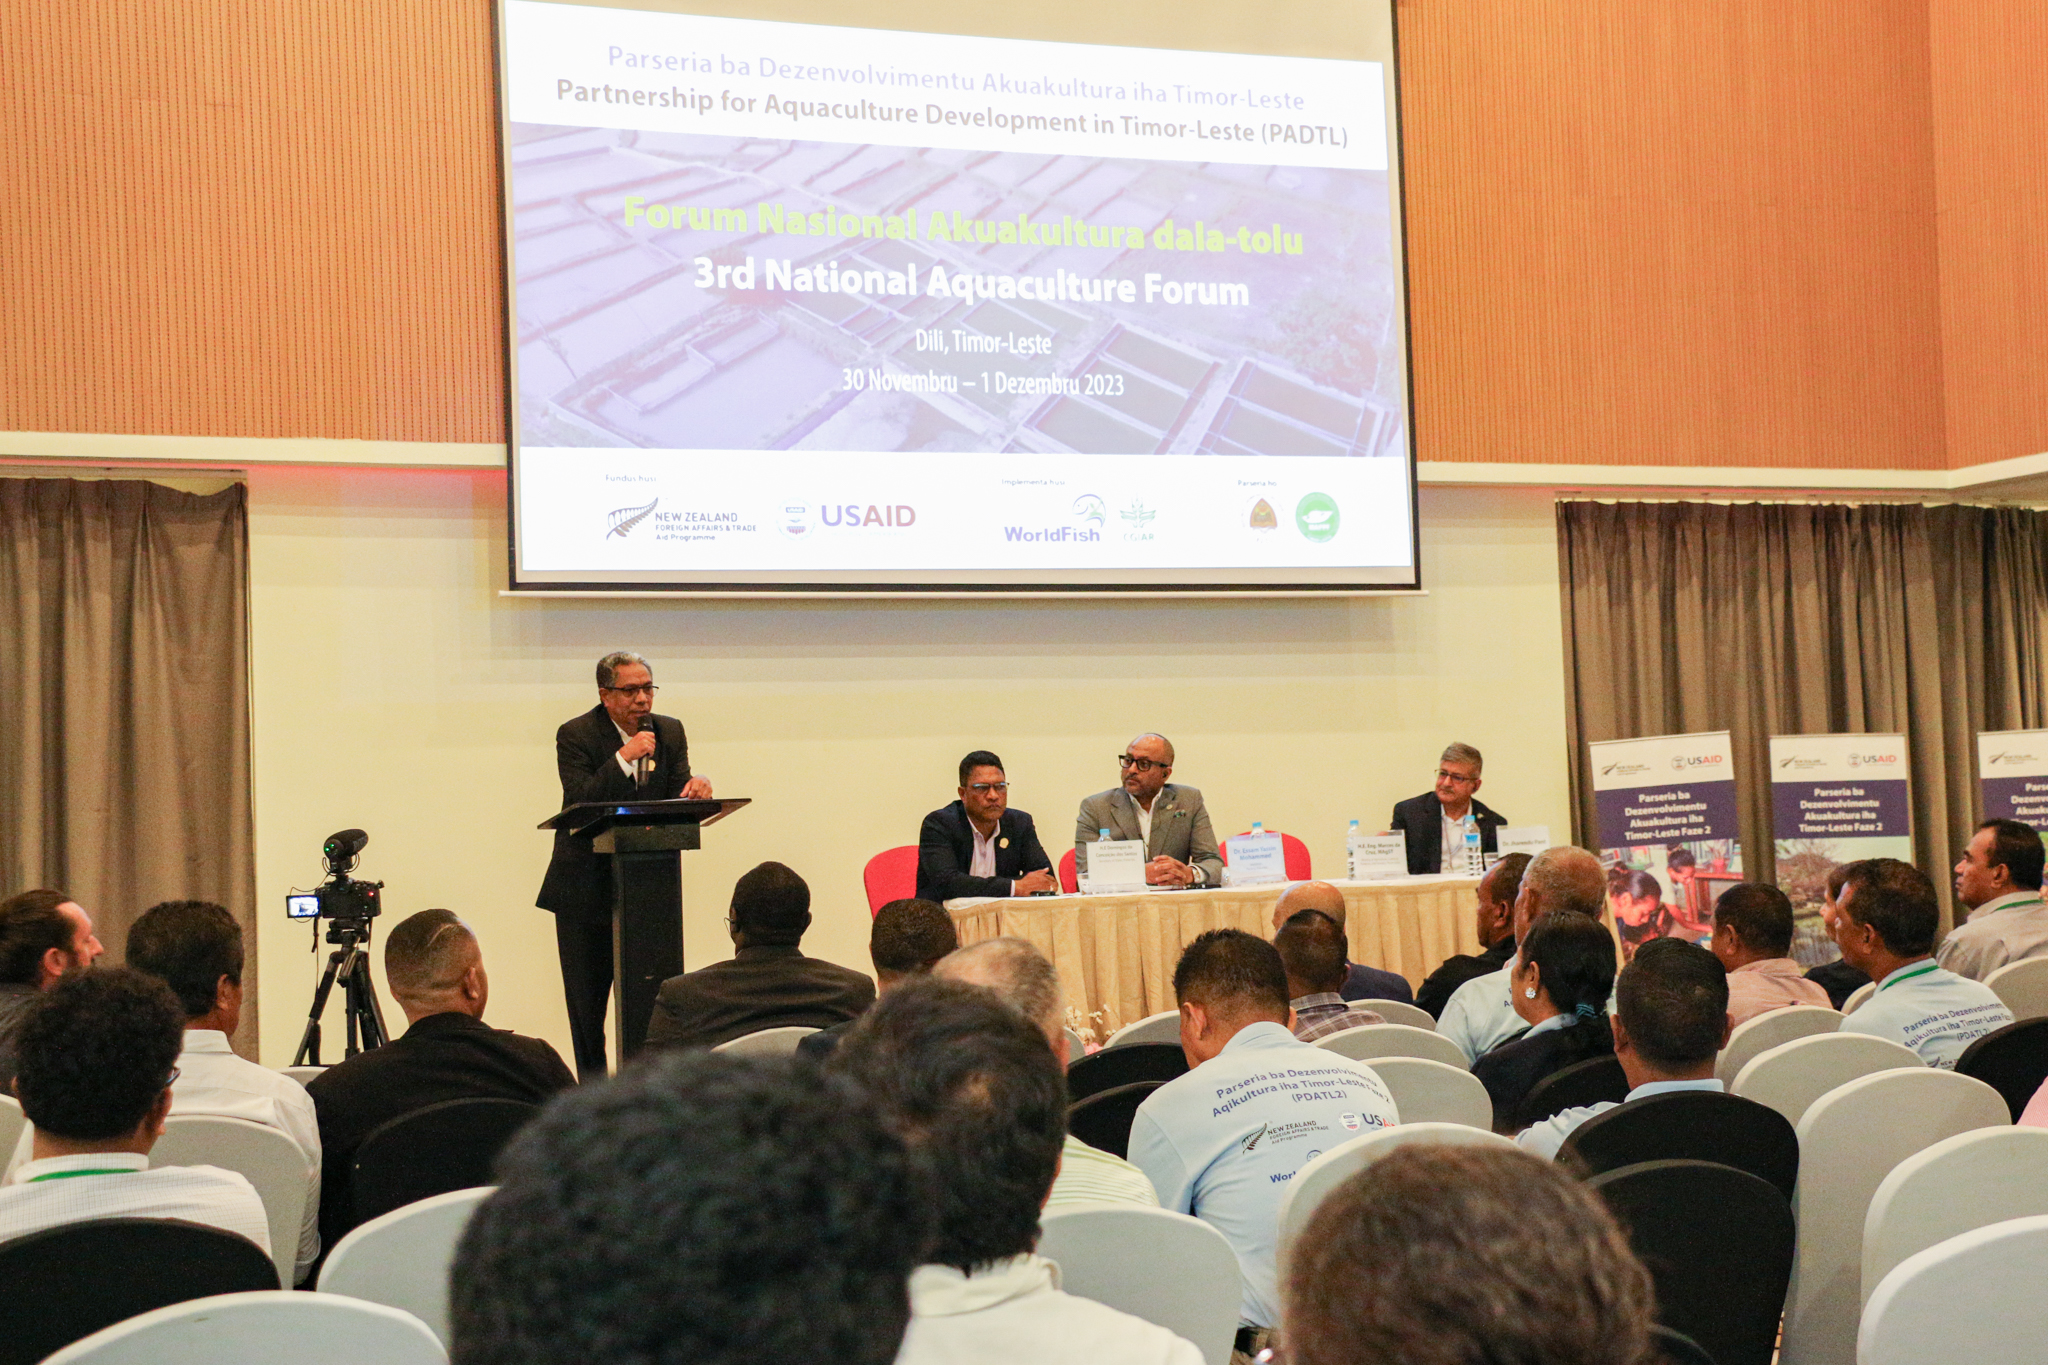 Opening session of the 3rd National Aquaculture Forum in Dili, Timor-Leste, on 30 November 2023.